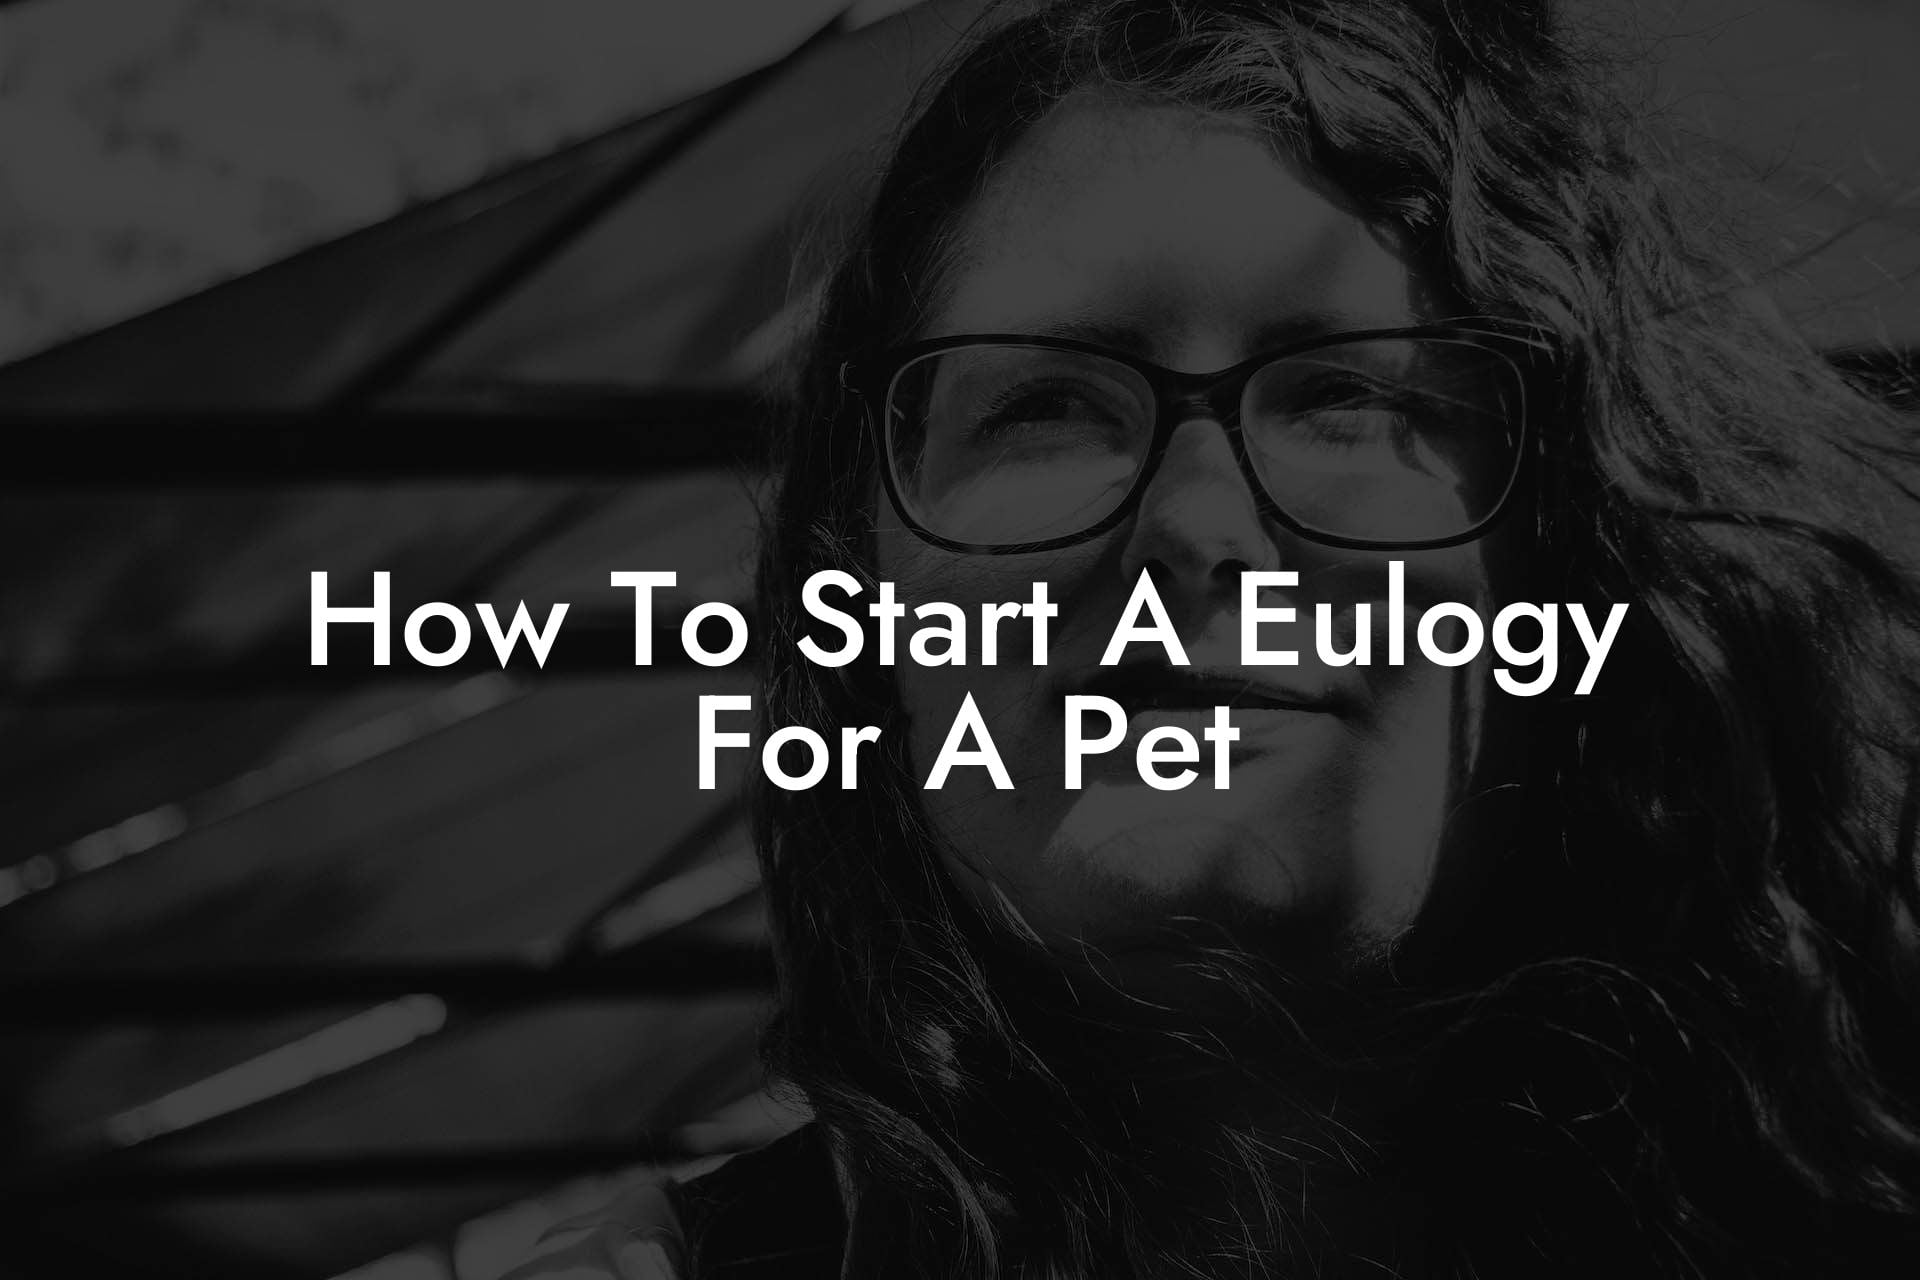 How To Start A Eulogy For A Pet